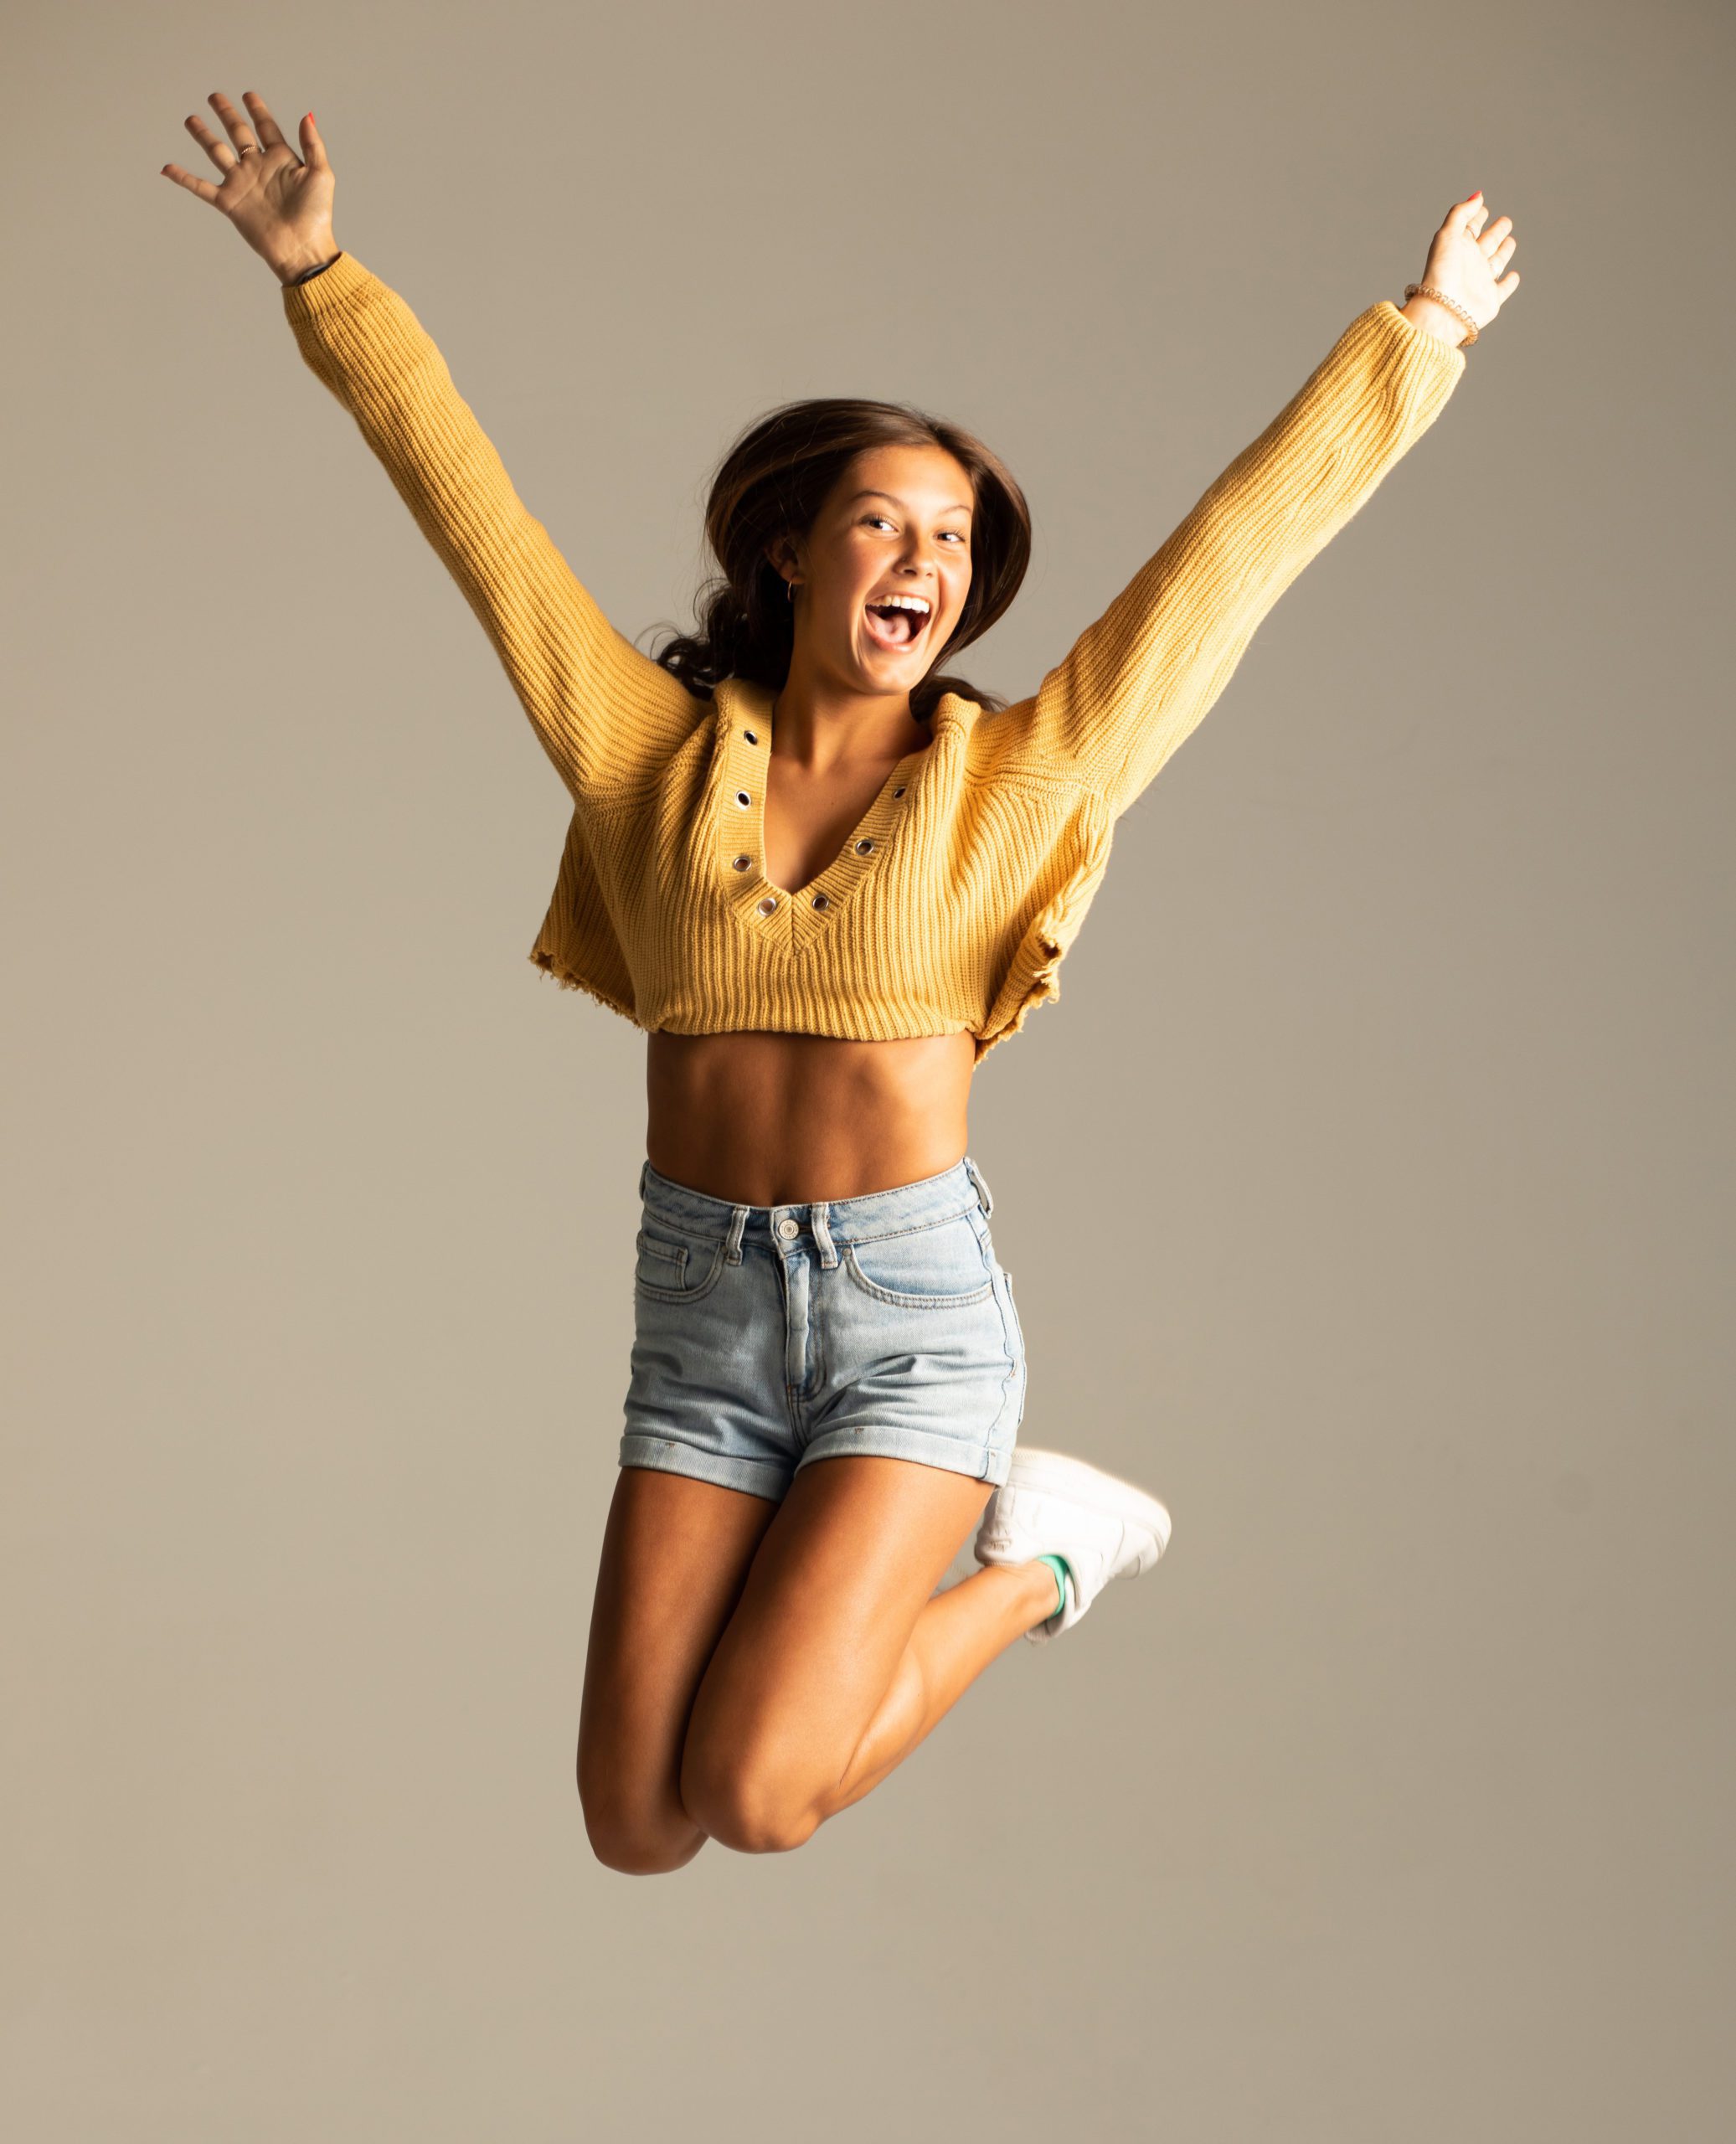 lighthearted jumping photo for modeling headshots for Chavey block agency nashville tn